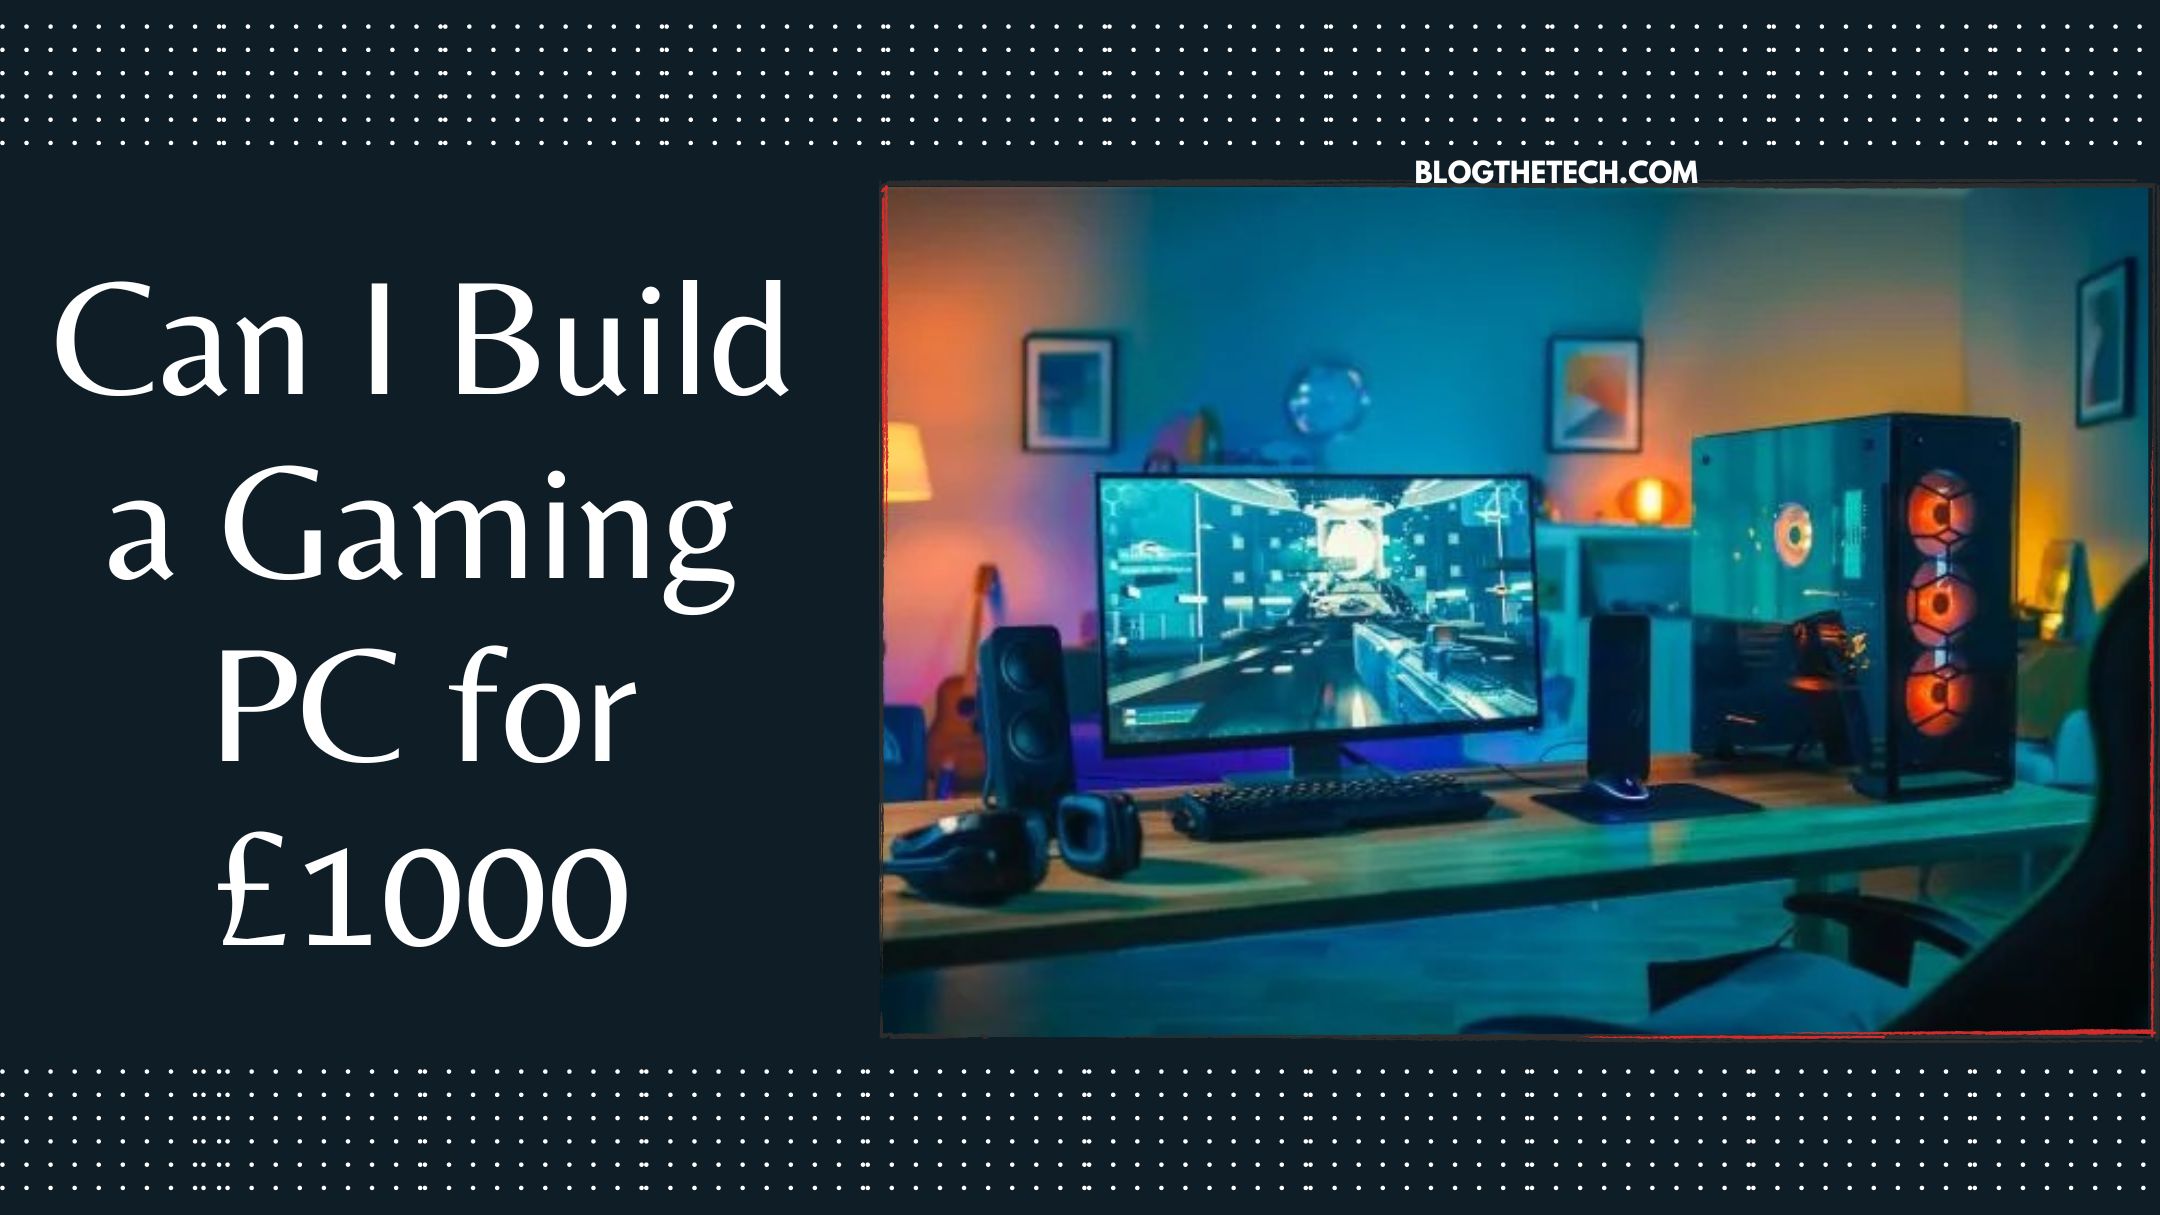 can-i-build-a-gaming-pc-for-£1000-featured